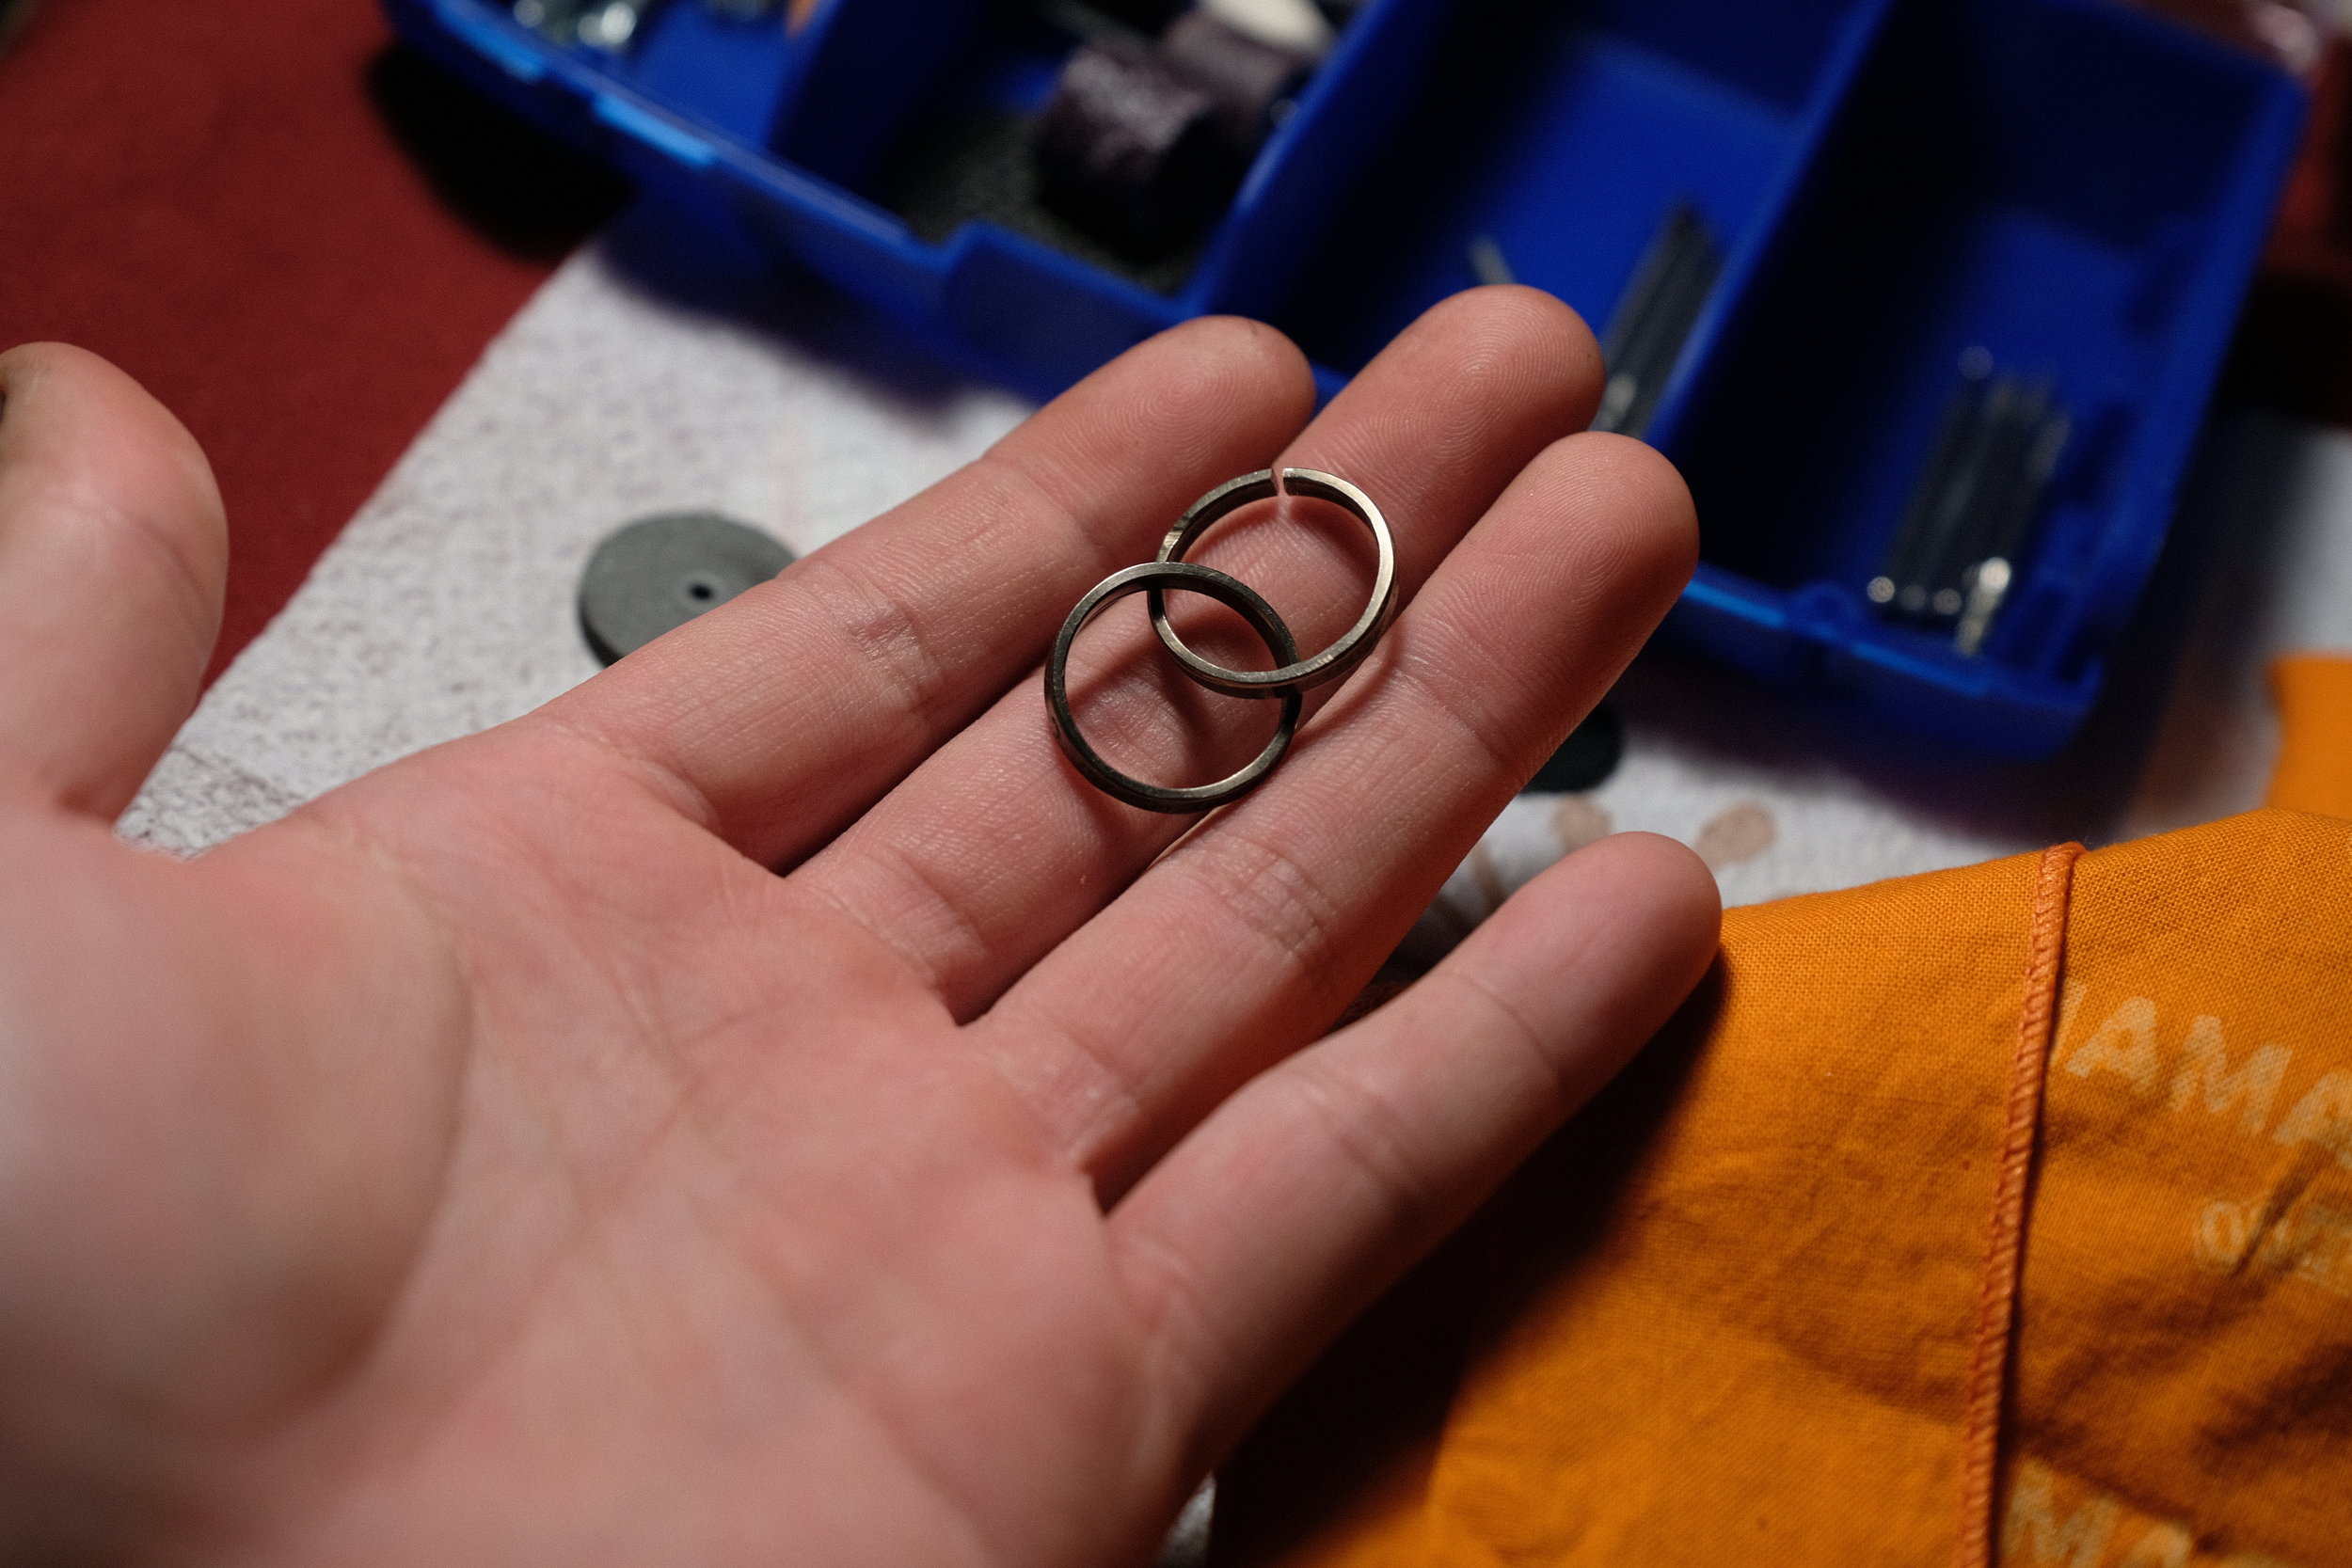  Gently widening the gap allows the other ring through. Though I was initially concerned about deforming the ring, there were no lasting issues. 